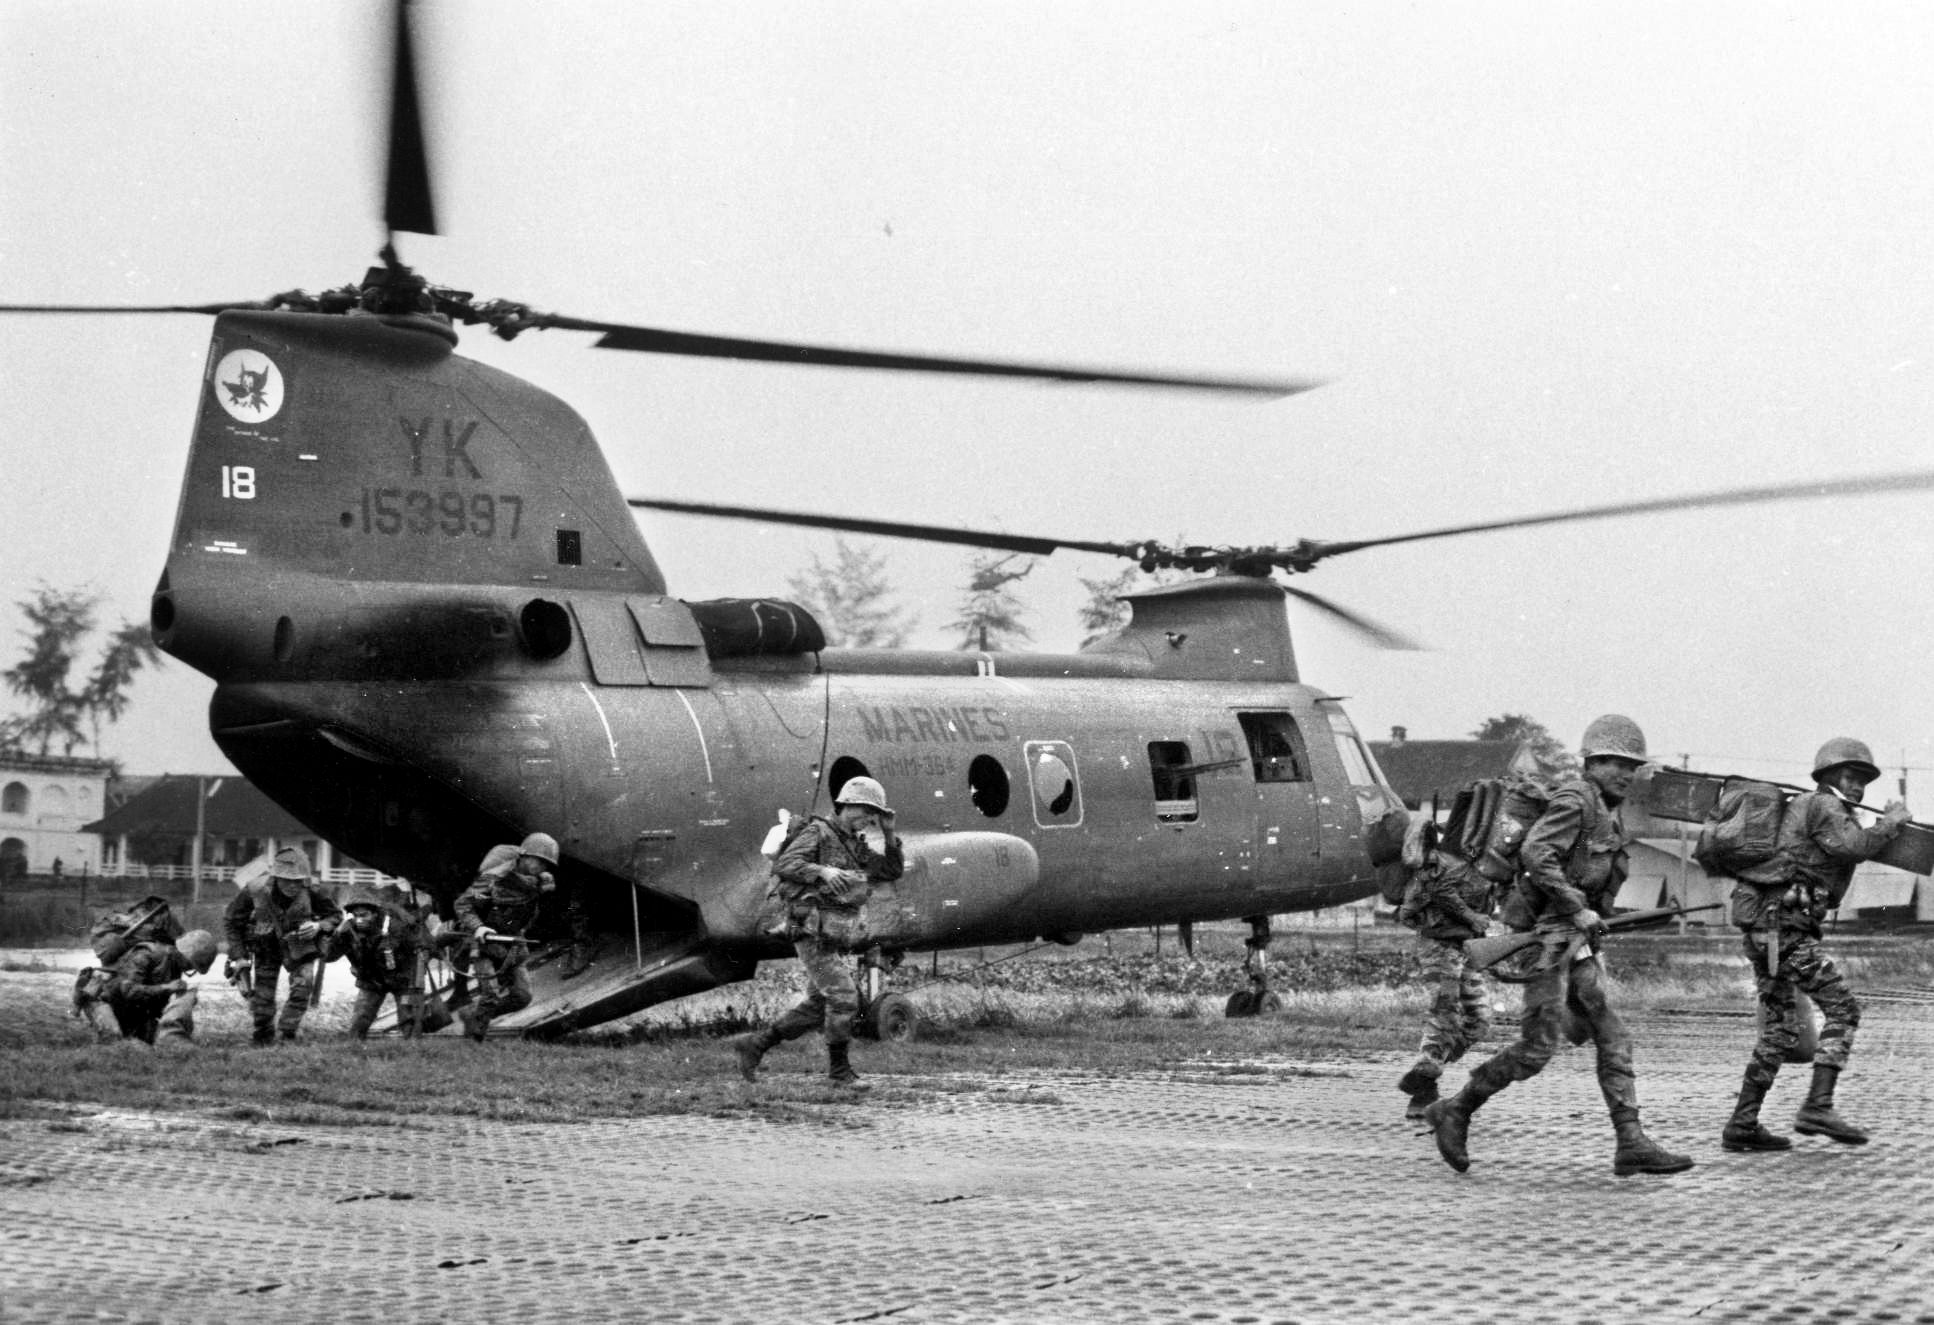 U.S. Marine Corps helicopter drops off Vietnamese Marine reinforcements, February 23, 1968. Introduced in Vietnam in 1965, the Boeing/Vertol CH-46 Sea Knight could carry 12-13 marines, compared to the Army’s Huey capacity of 5-6. The CH-46’s cruising speed of 155 mph was also 25 mph faster than the Huey.